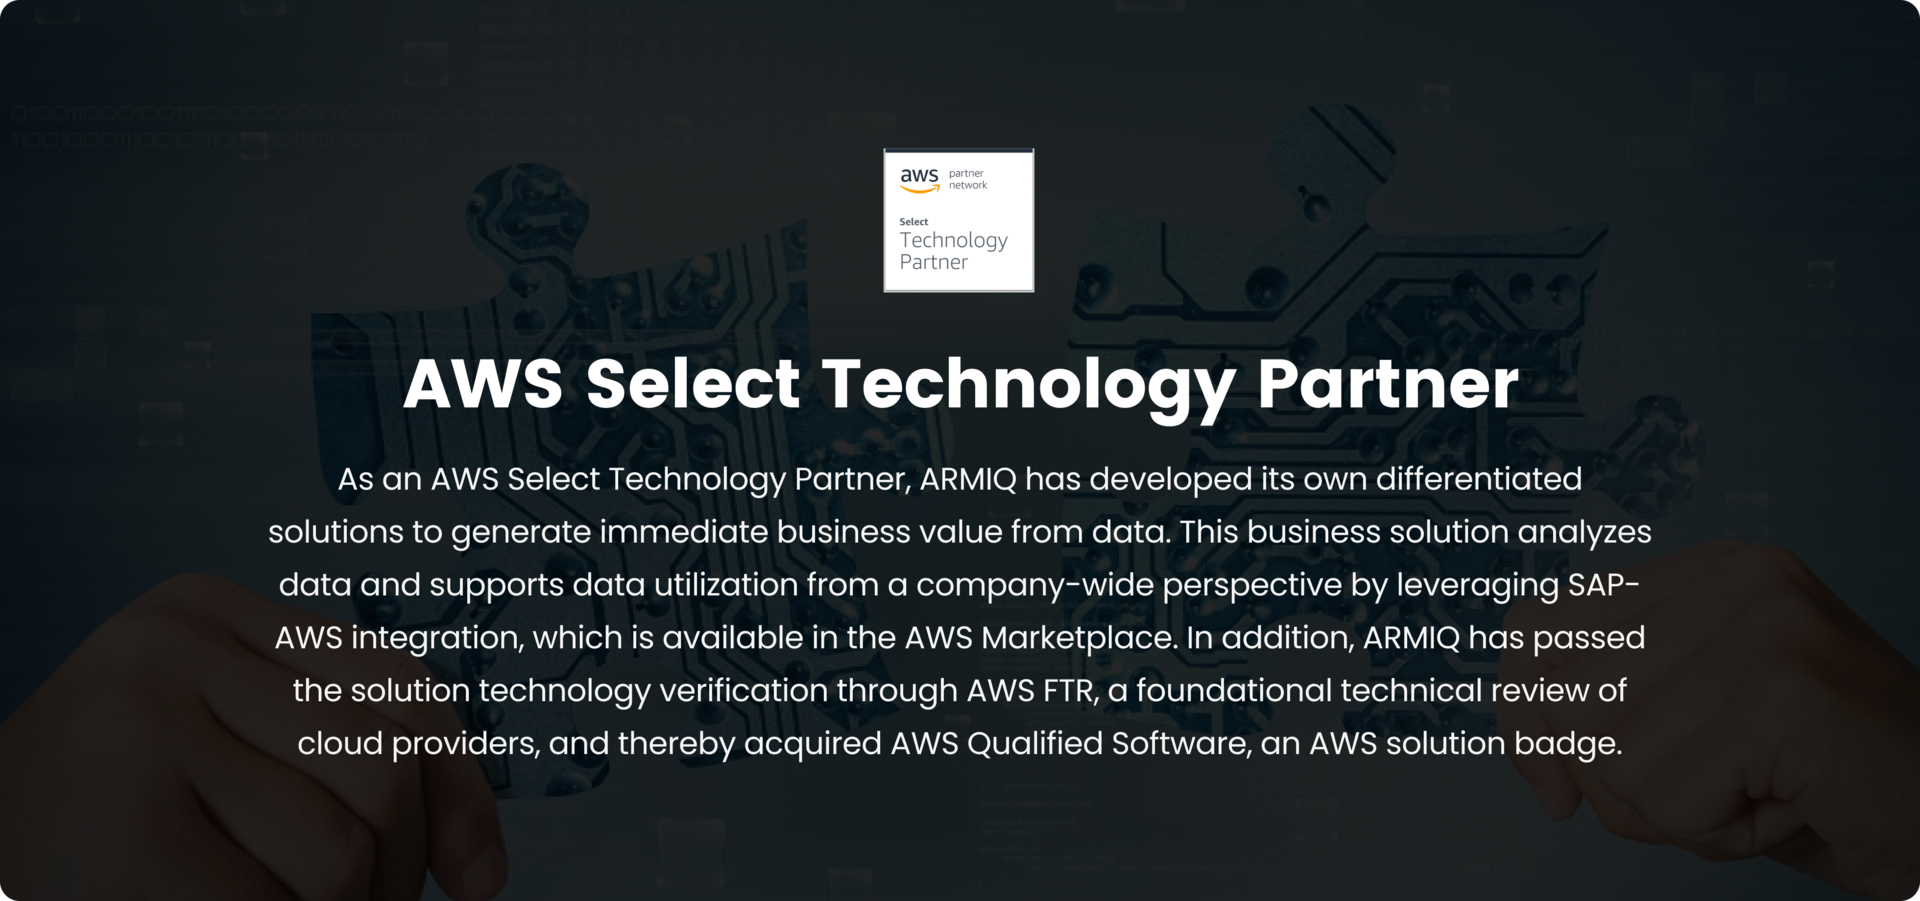 AWS Select Technology Partner, As an AWS Select Technology Partner, ARMIQ has developed its own differentiated solutions to generate immediate business value from data. This business solution analyzes data and supports data utilization from a company-wide perspective by leveraging SAP-AWS integration, which is available in the AWS Marketplace. In addition, ARMIQ has passed the solution technology verification through AWS FTR, a foundational technical review of cloud providers, and thereby acquired AWS Qualified Software, an AWS solution badge.